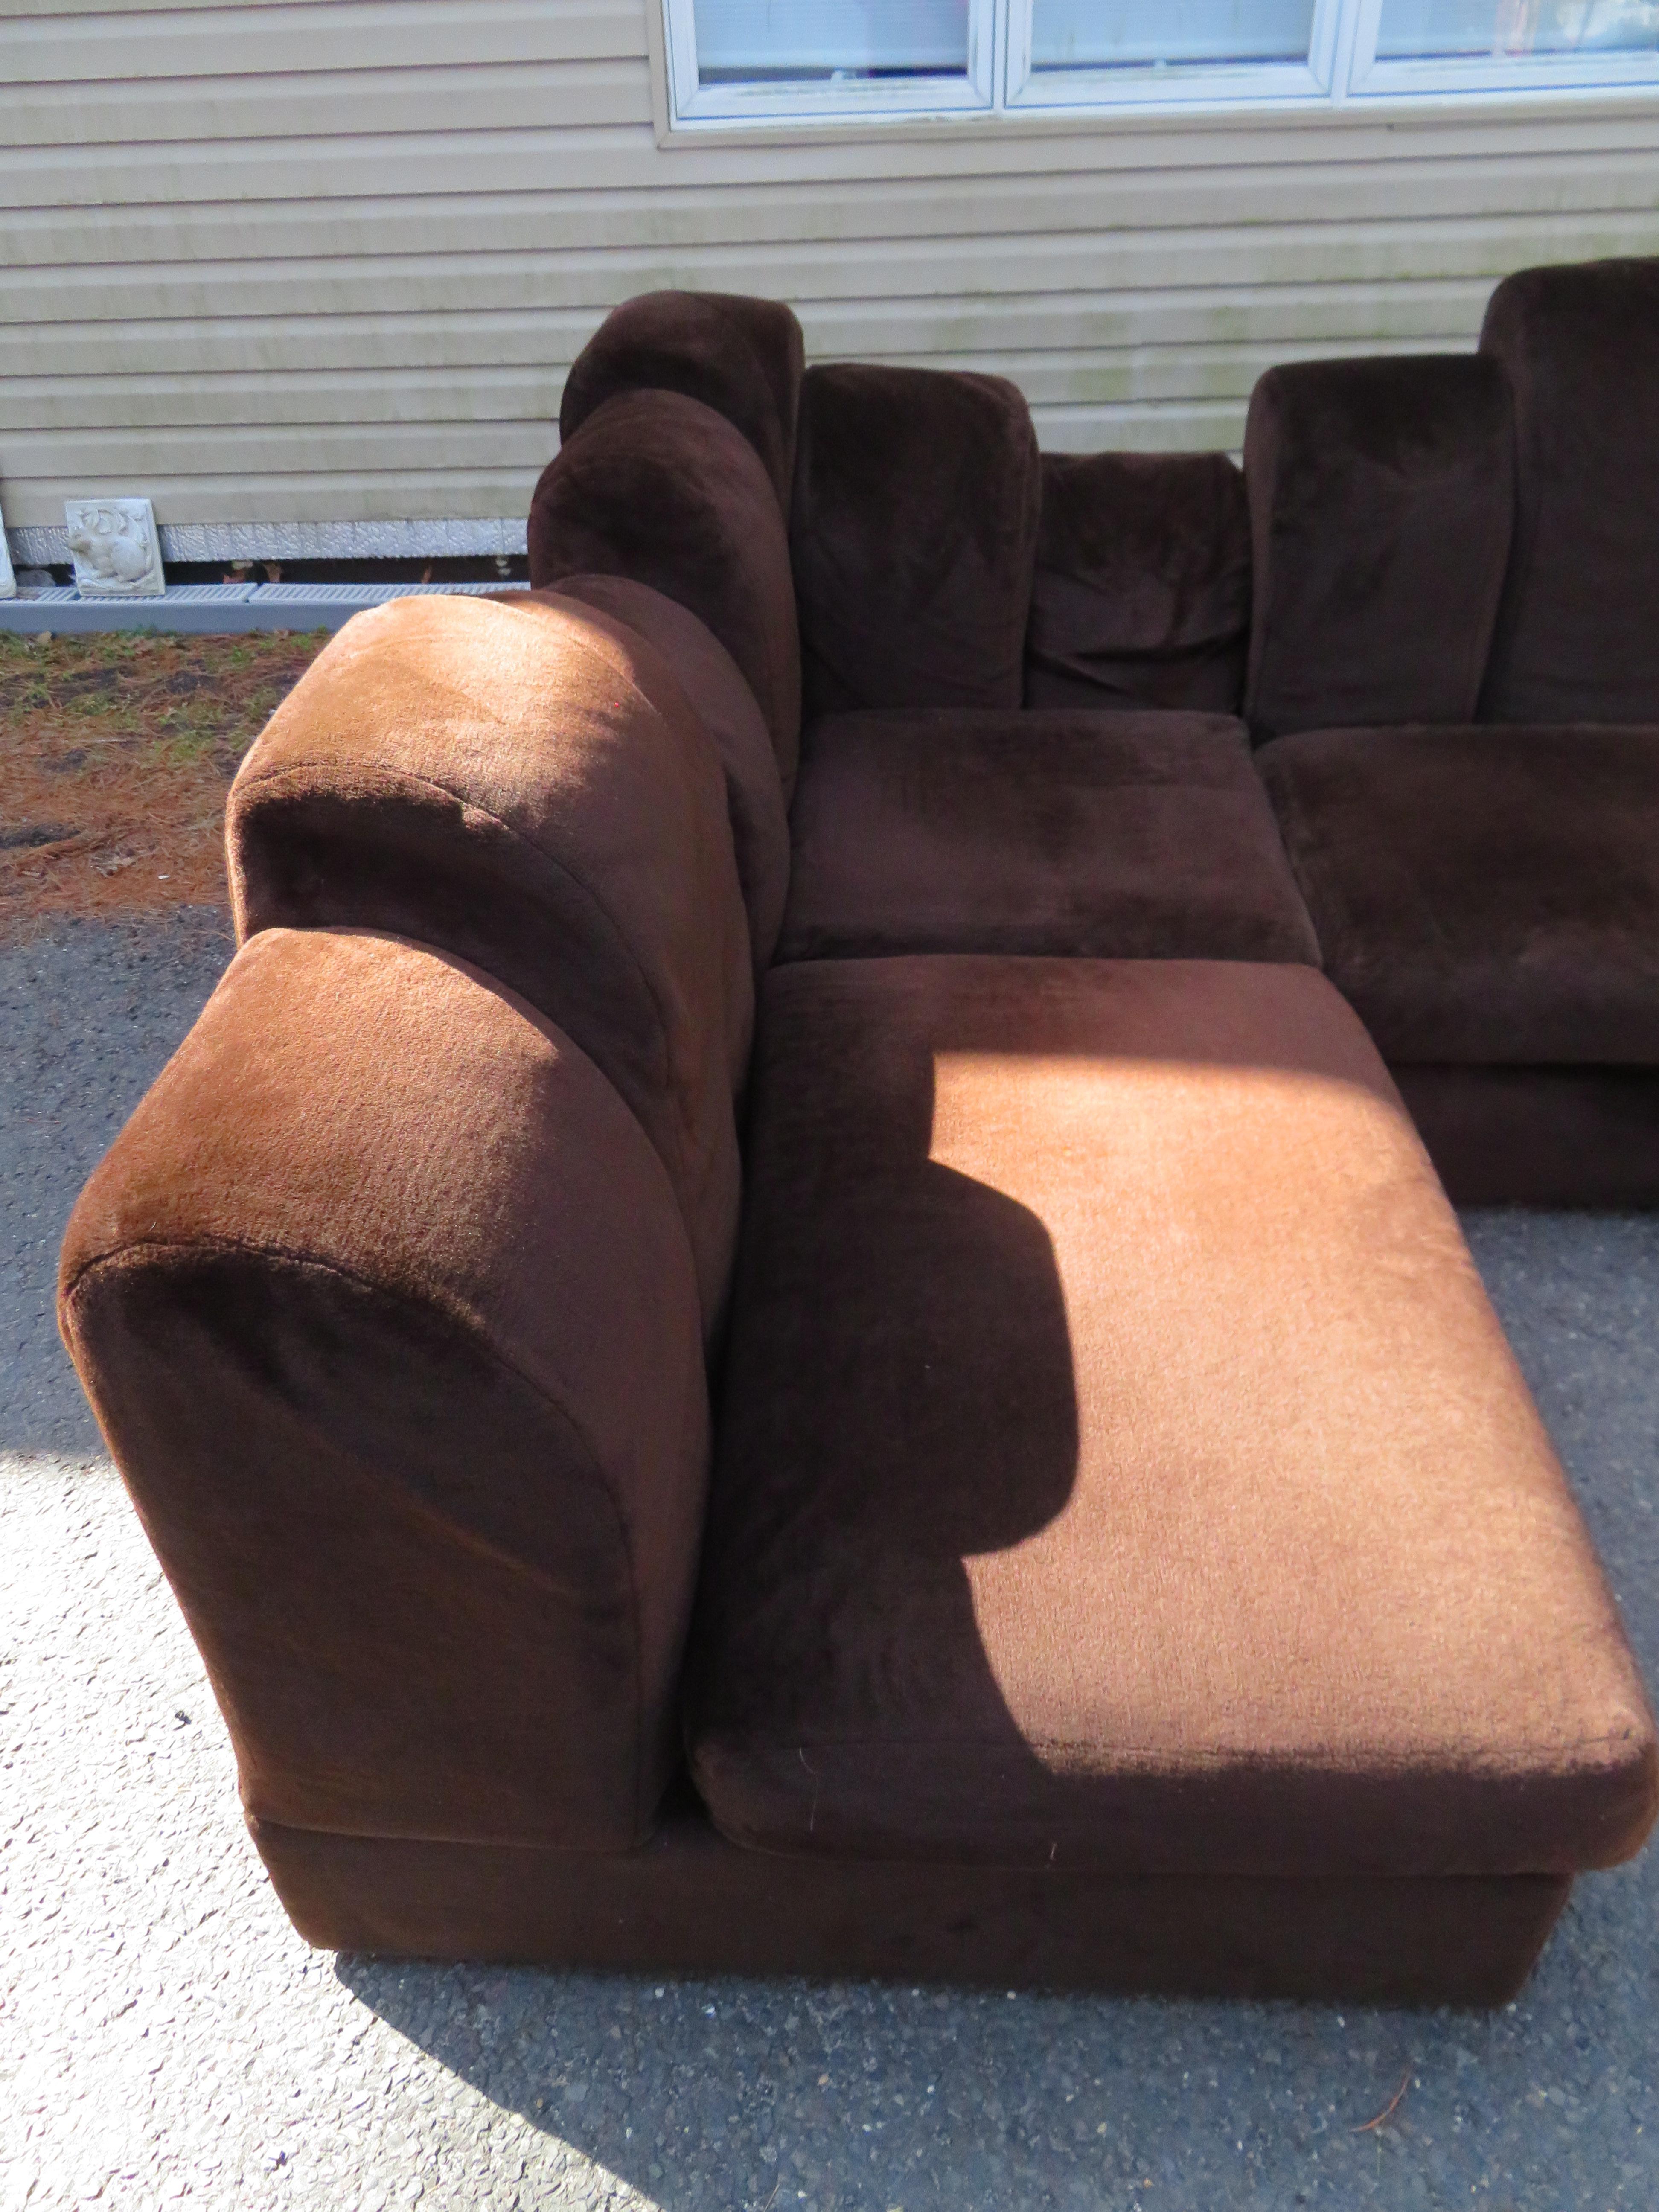 Upholstery Stunning 4 Piece Skyscraper Sectional Sofa Hans Hopfer Style Midcentury For Sale